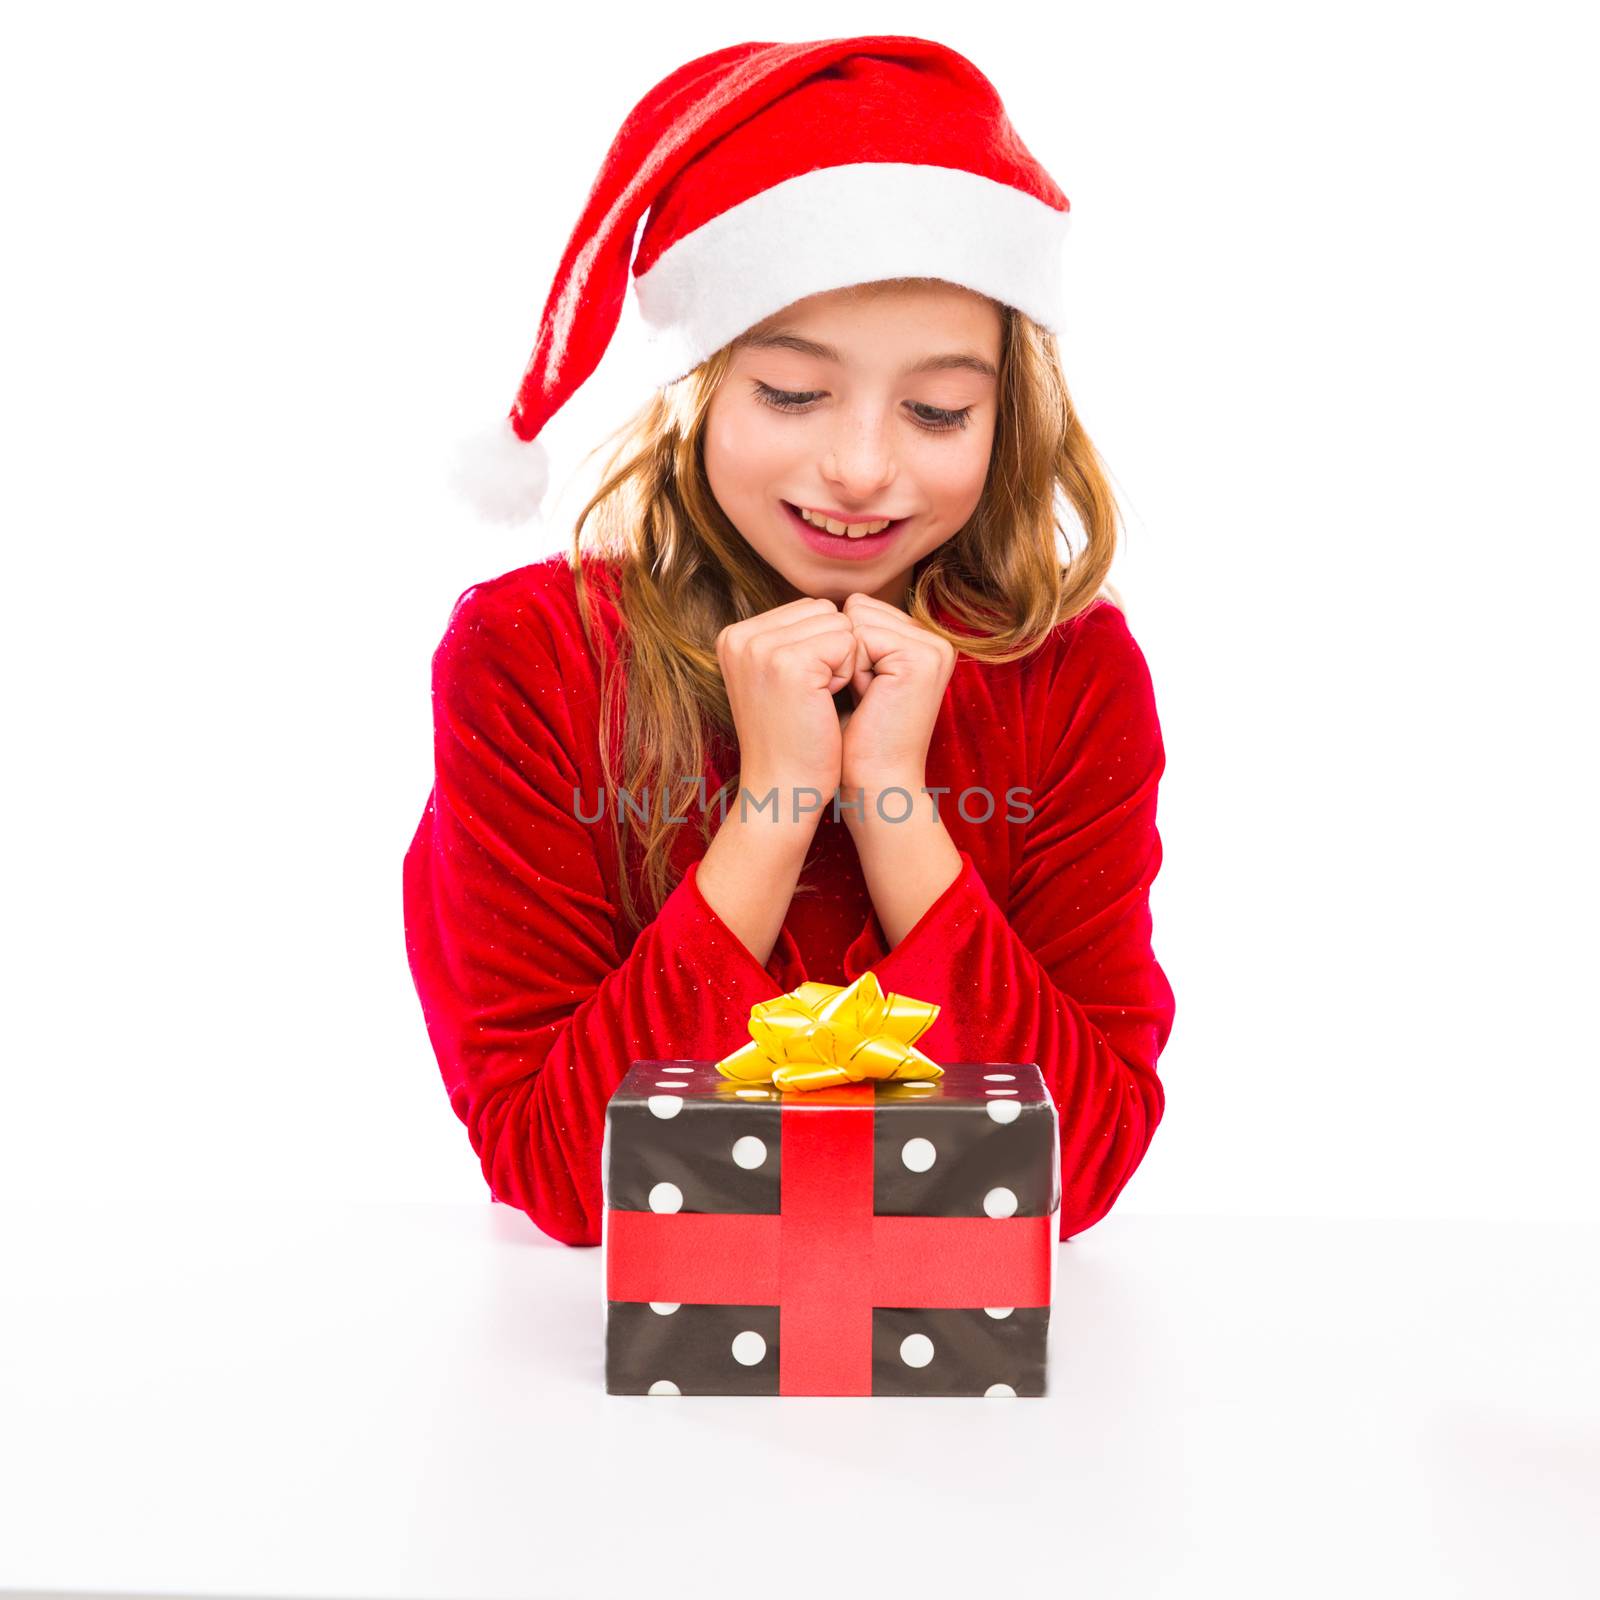 Christmas Santa kid girl happy excited with ribbon gift isolated on white background